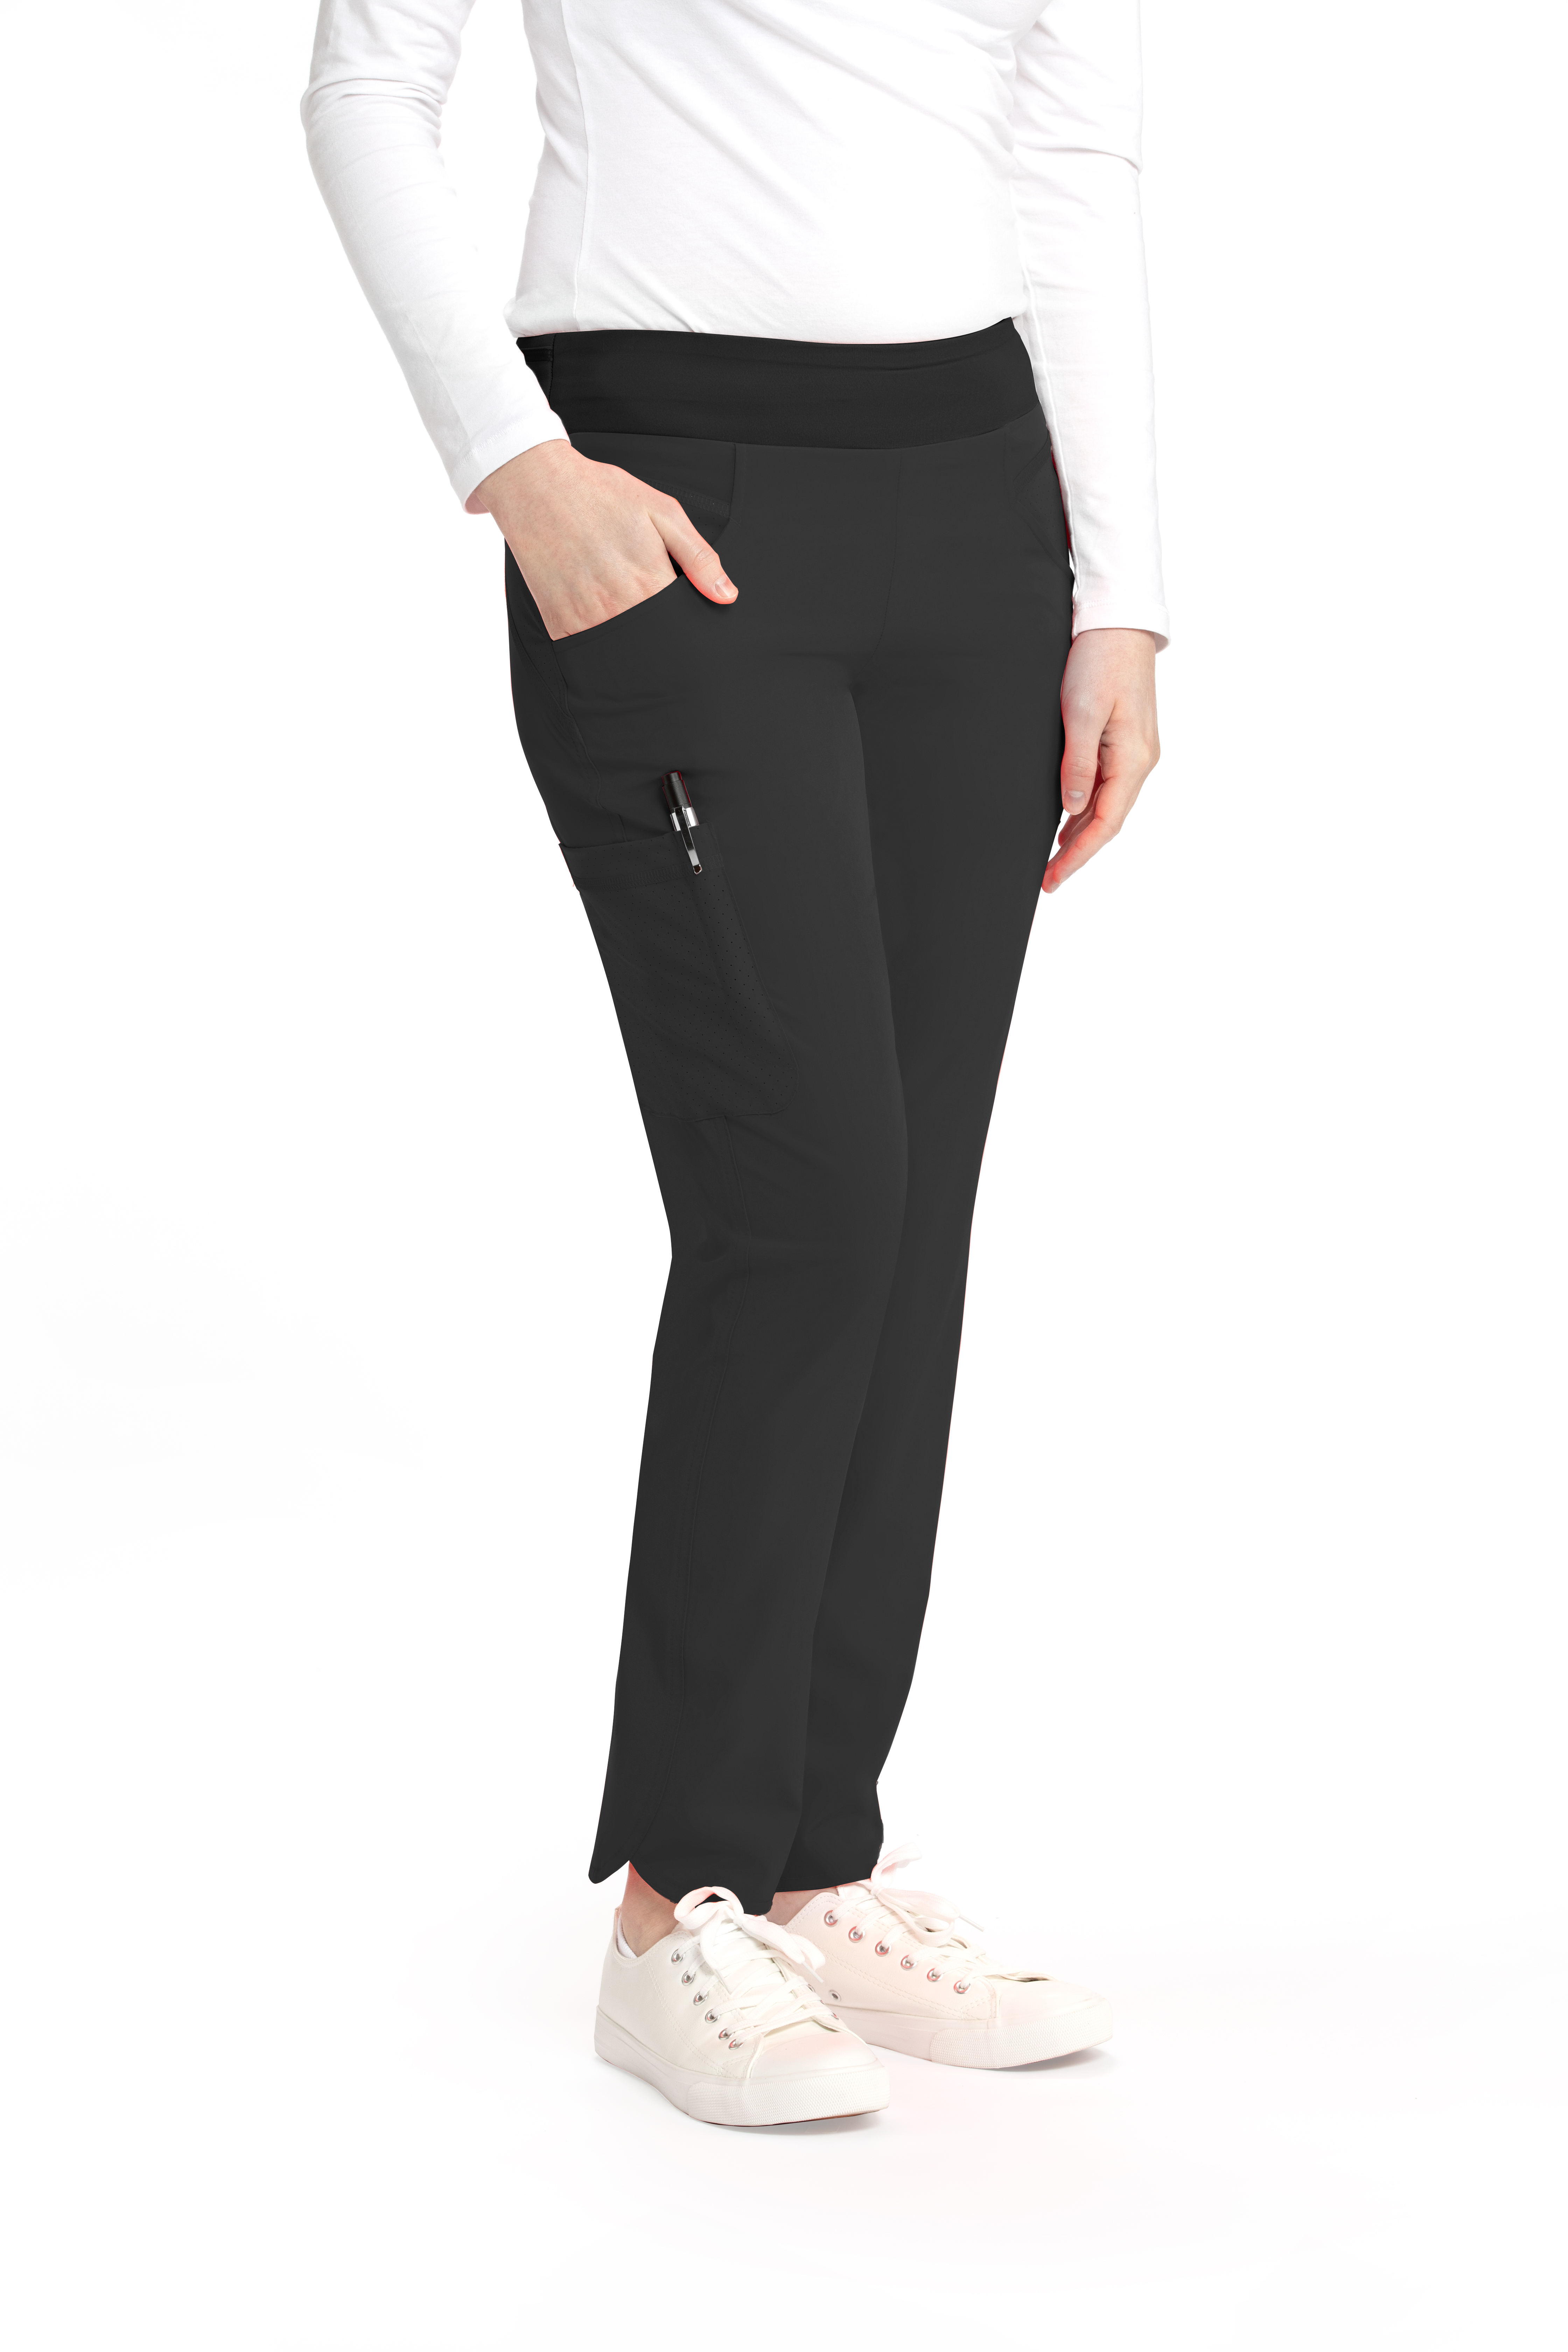 Barco One Spark Pant-Barco One